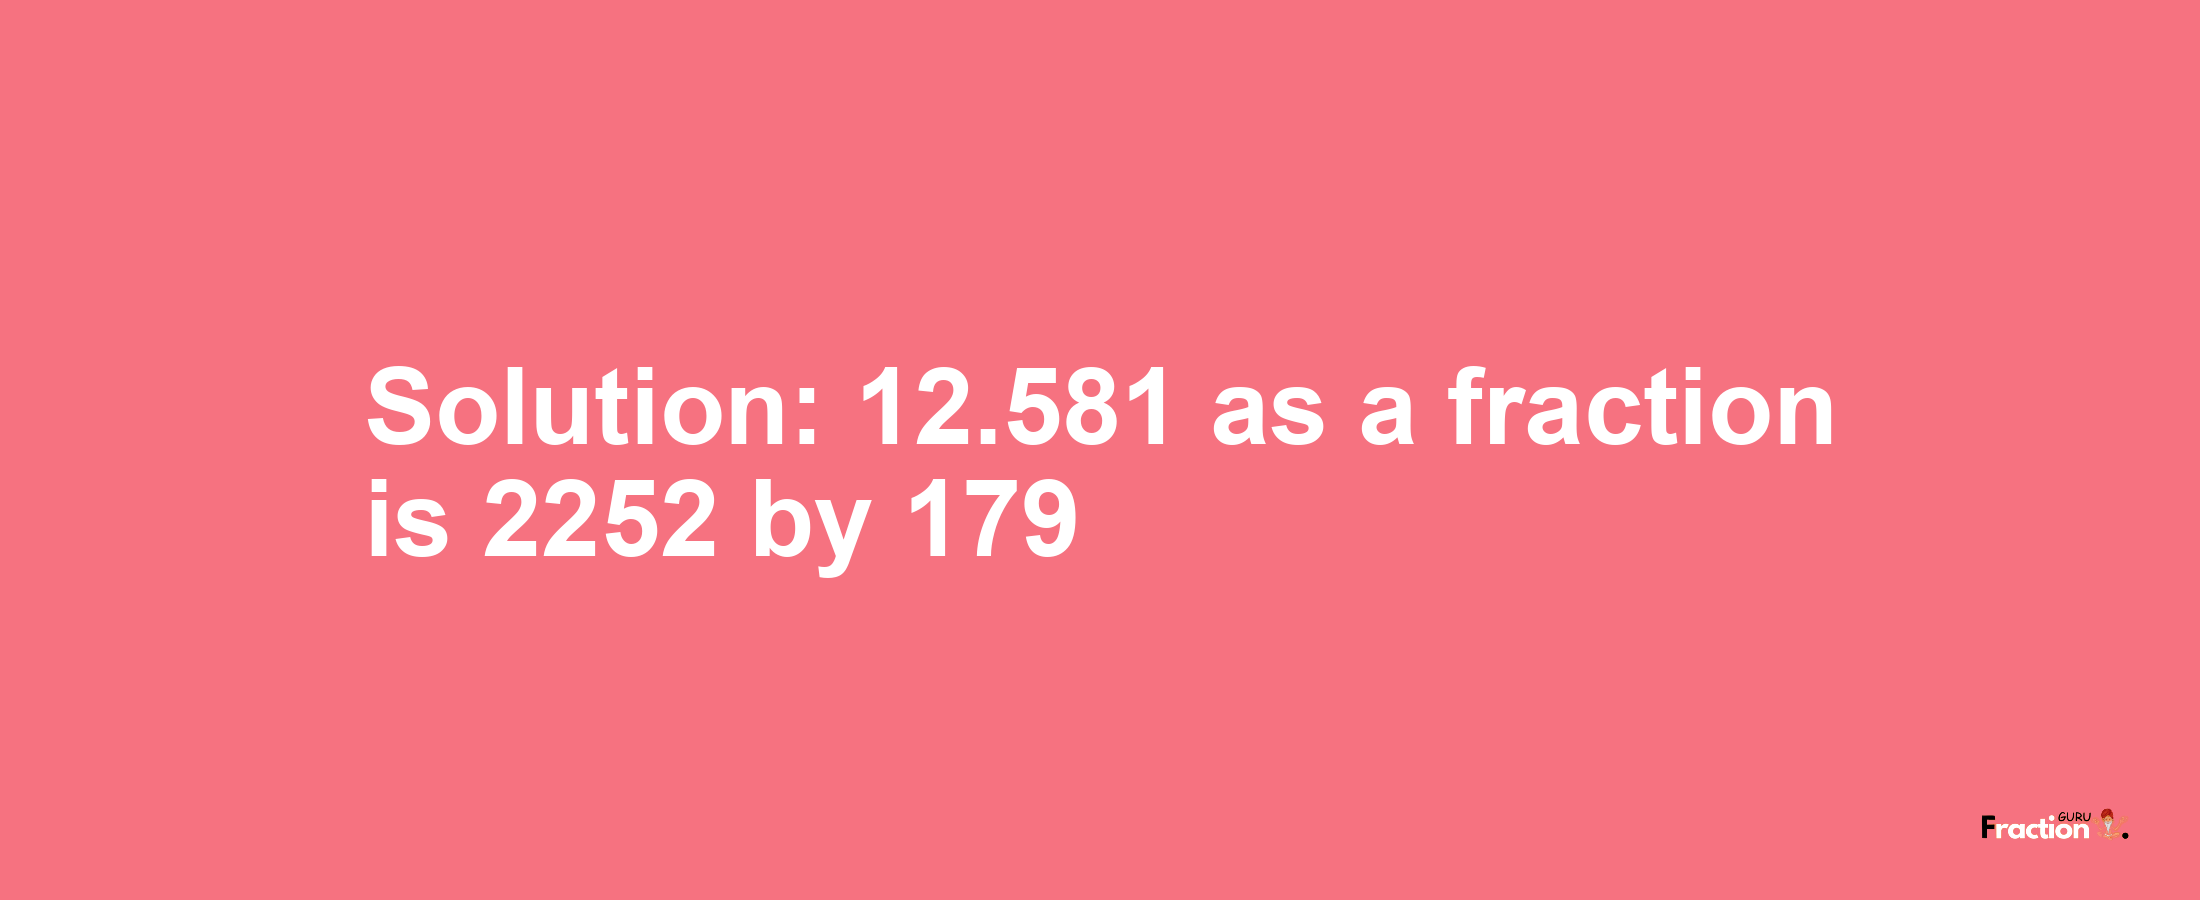 Solution:12.581 as a fraction is 2252/179